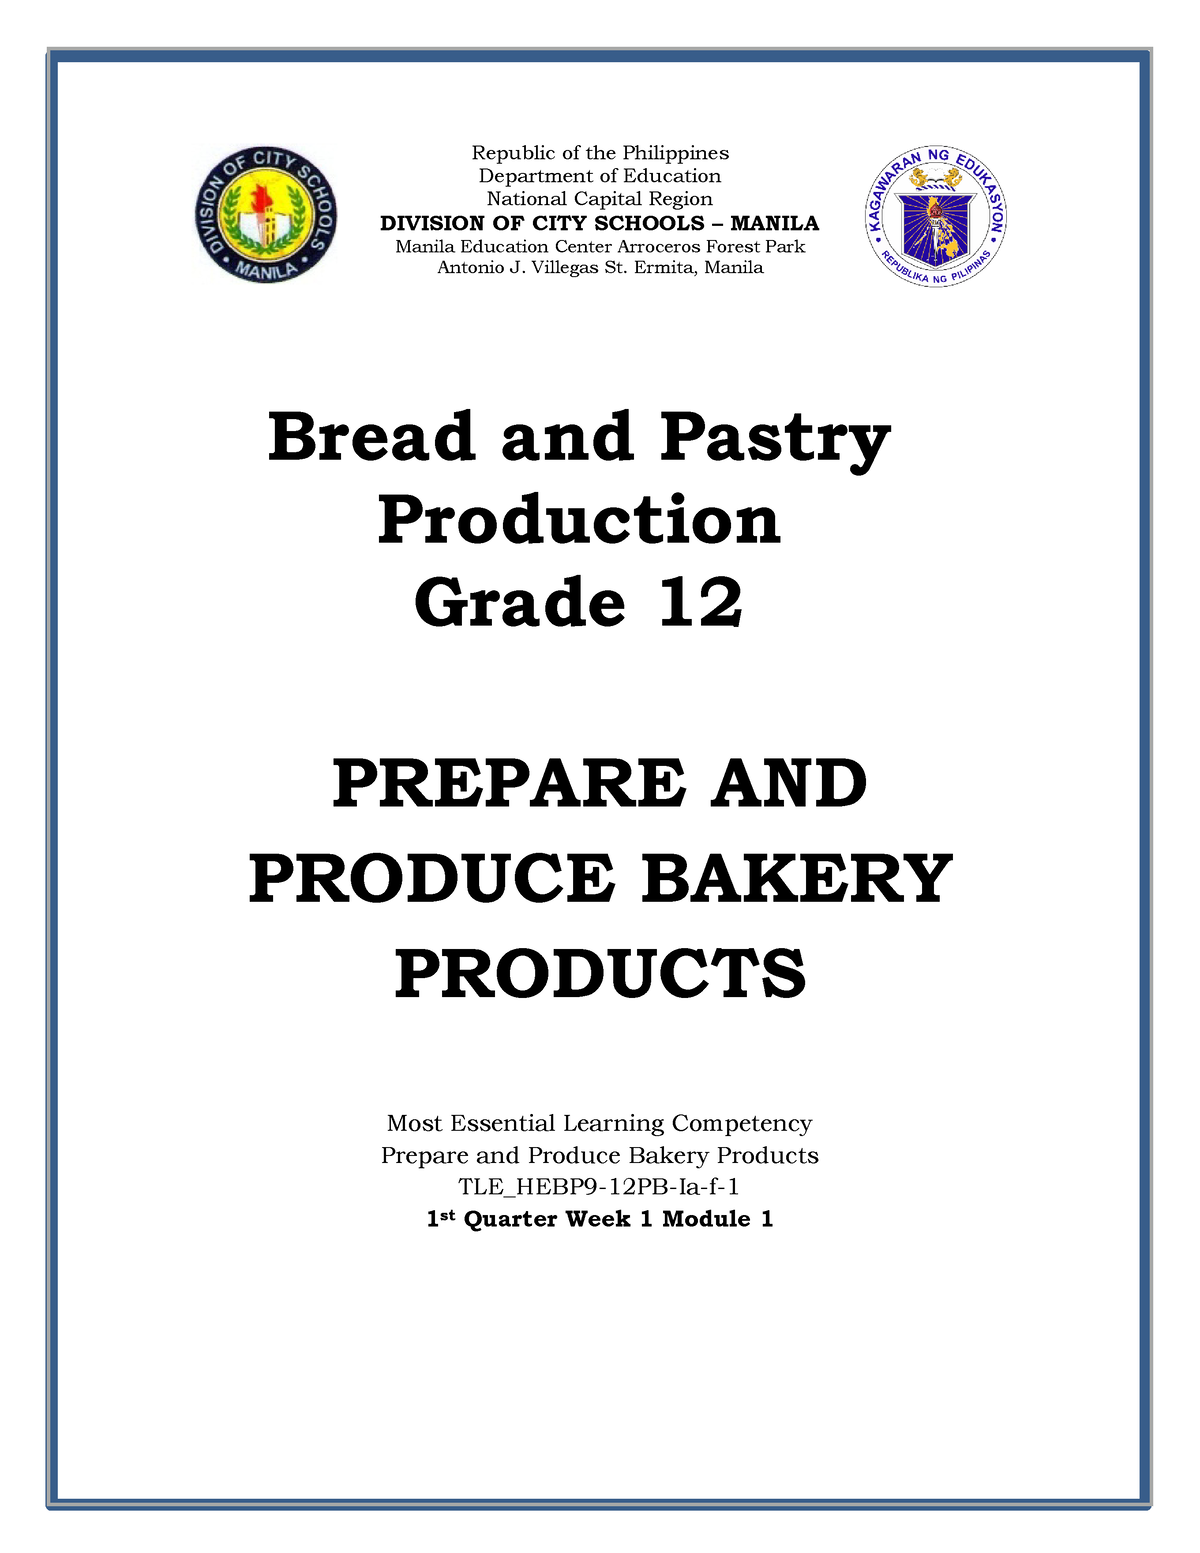 qualitative research title about bread and pastry